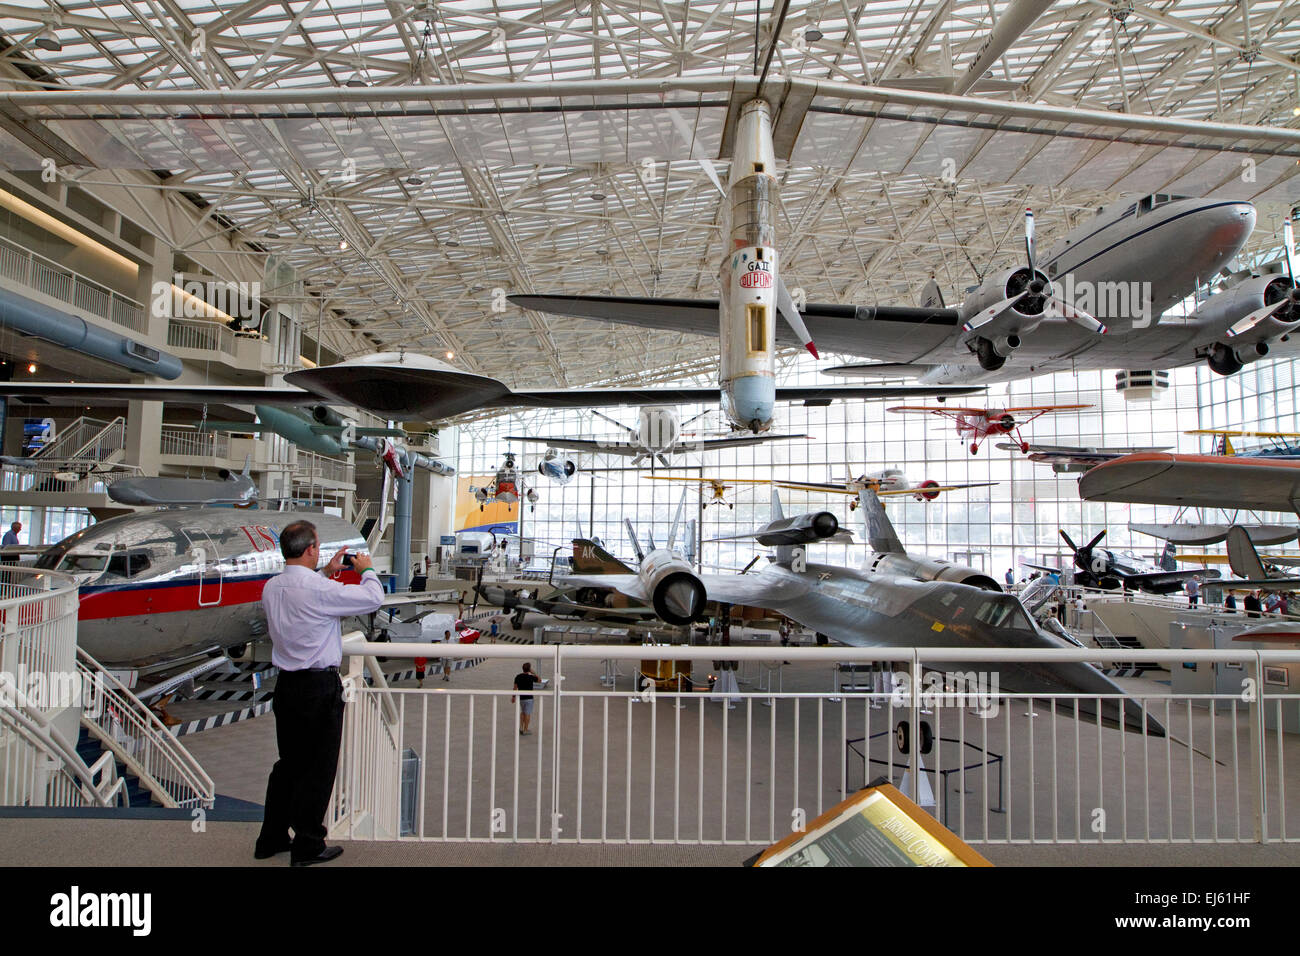 Museum of Flight in Seattle, Washington, USA. The T.A. Wilson Great Gallery with more that 20 full-size airplane suspended. Stock Photo